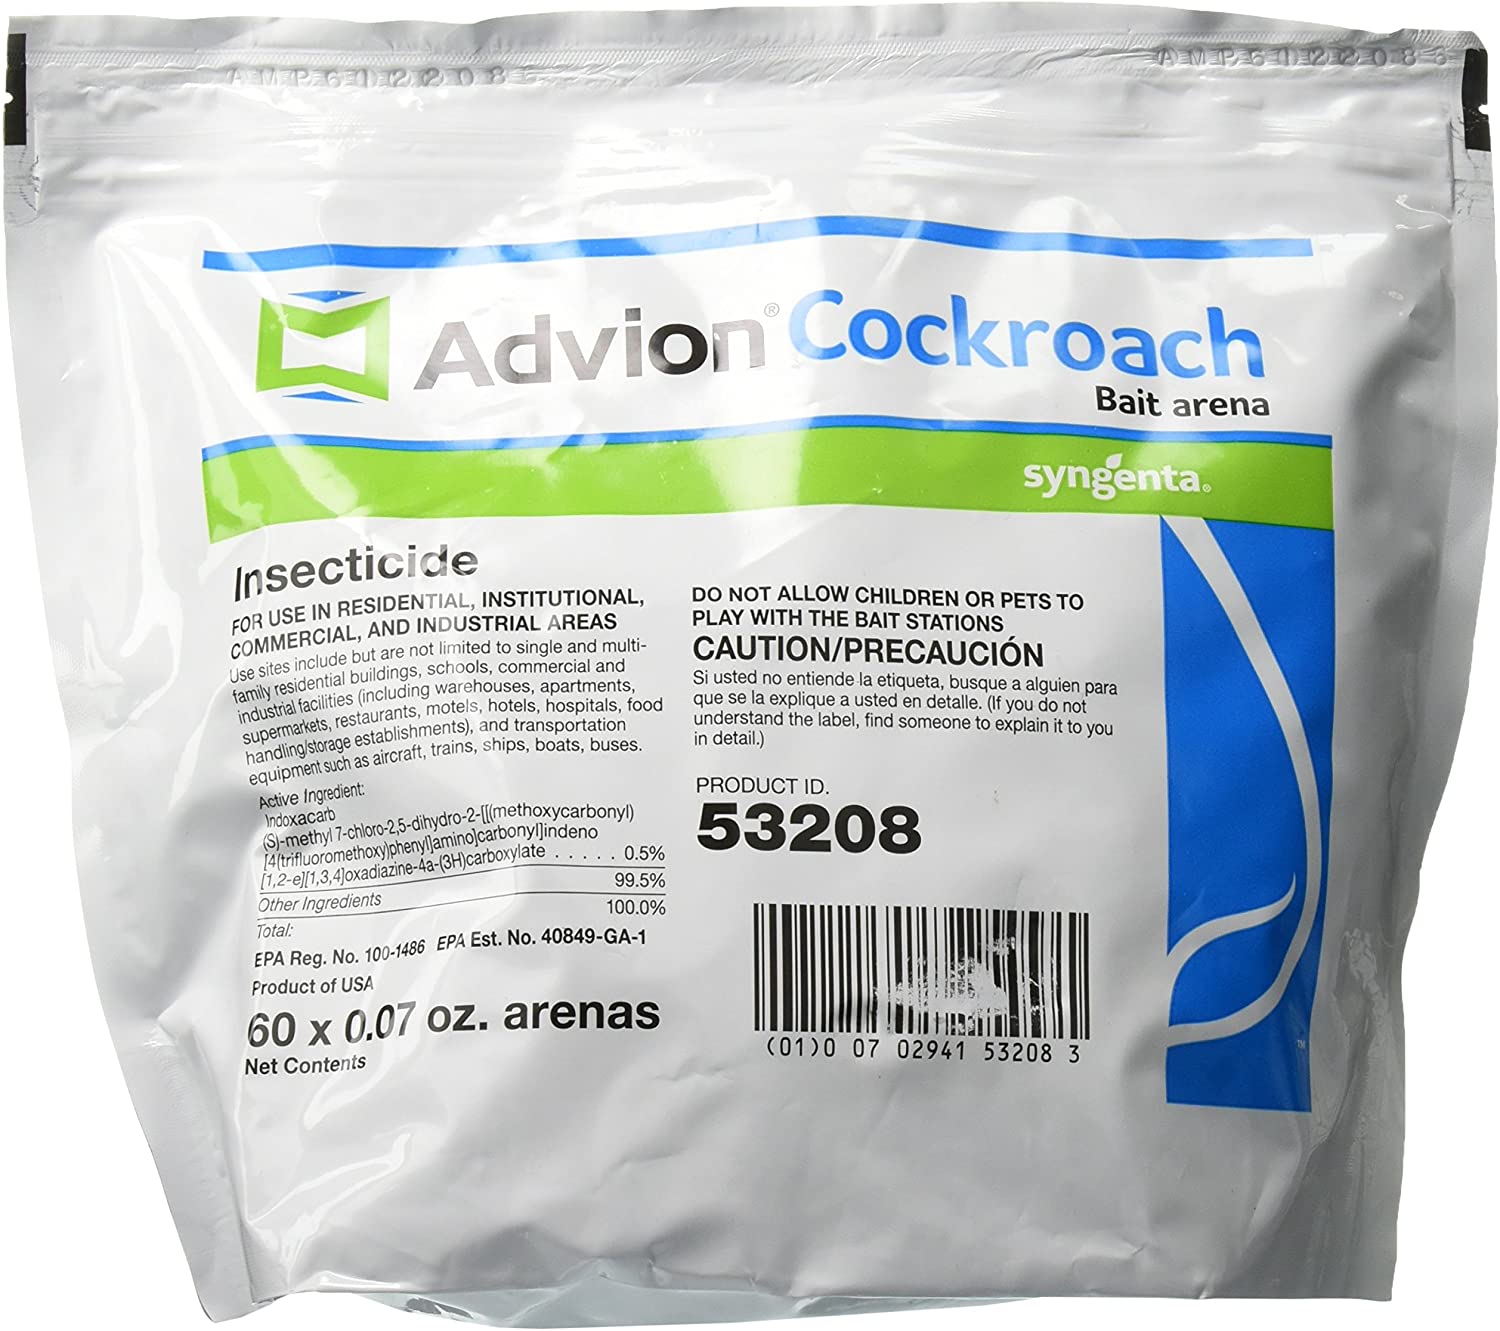 Syngenta A20378A Advion Cockroach Bait Arena Insecticide, 60Count Bag